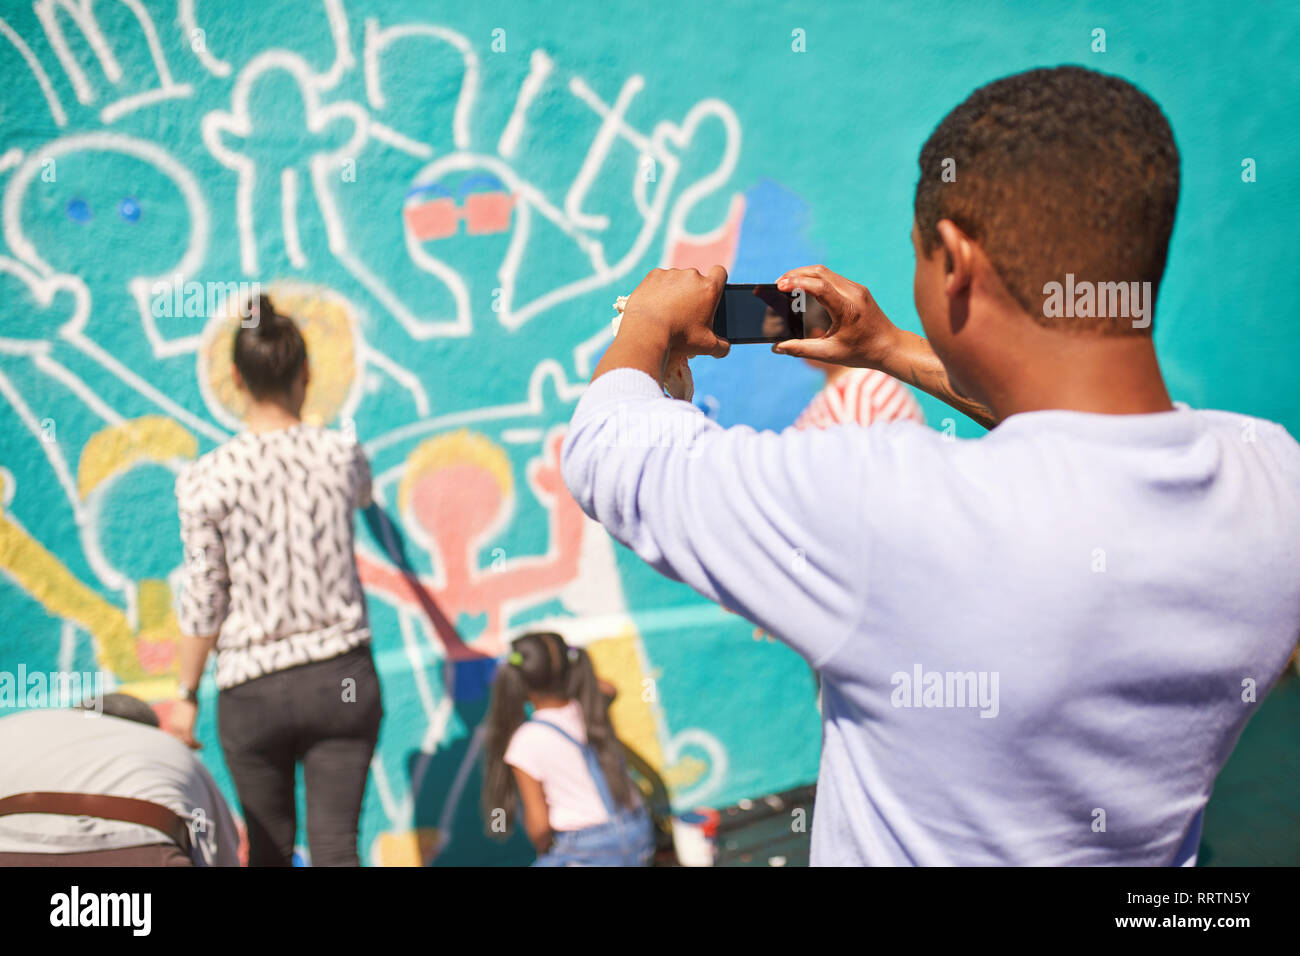 Man with camera phone photographing community mural on sunny wall Stock Photo